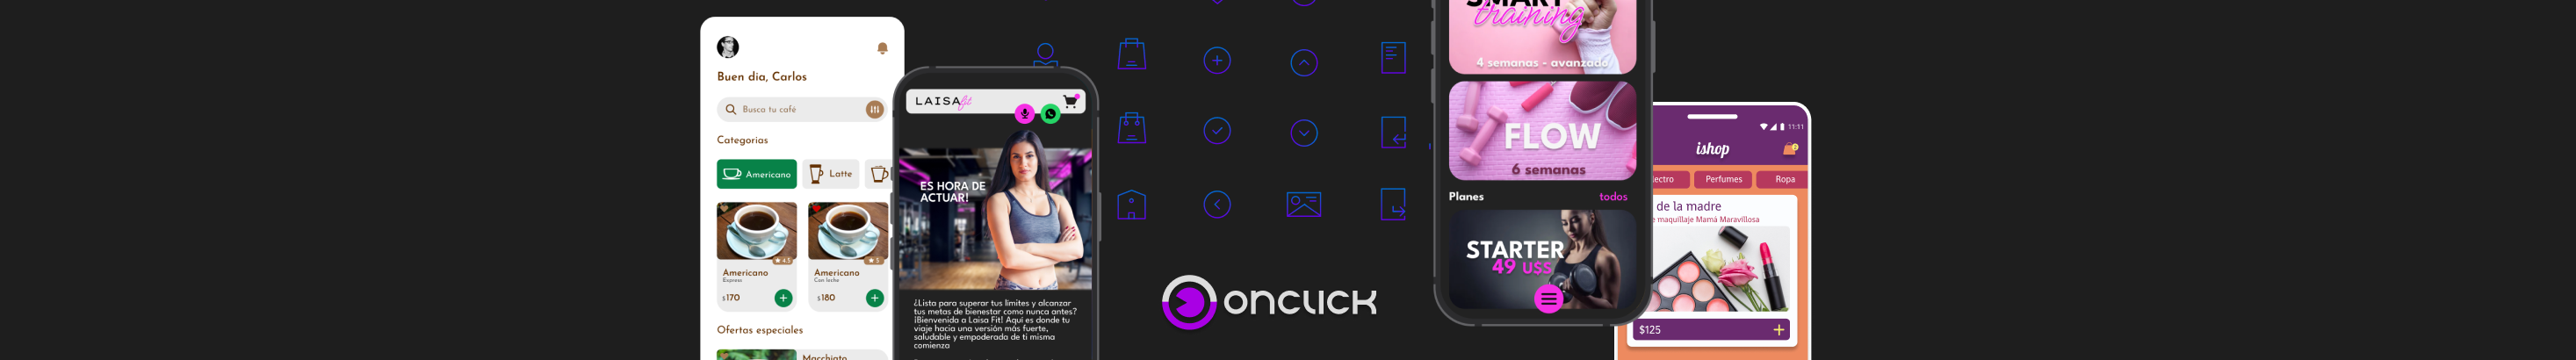 ONCLICK 💻✒🎨's profile banner